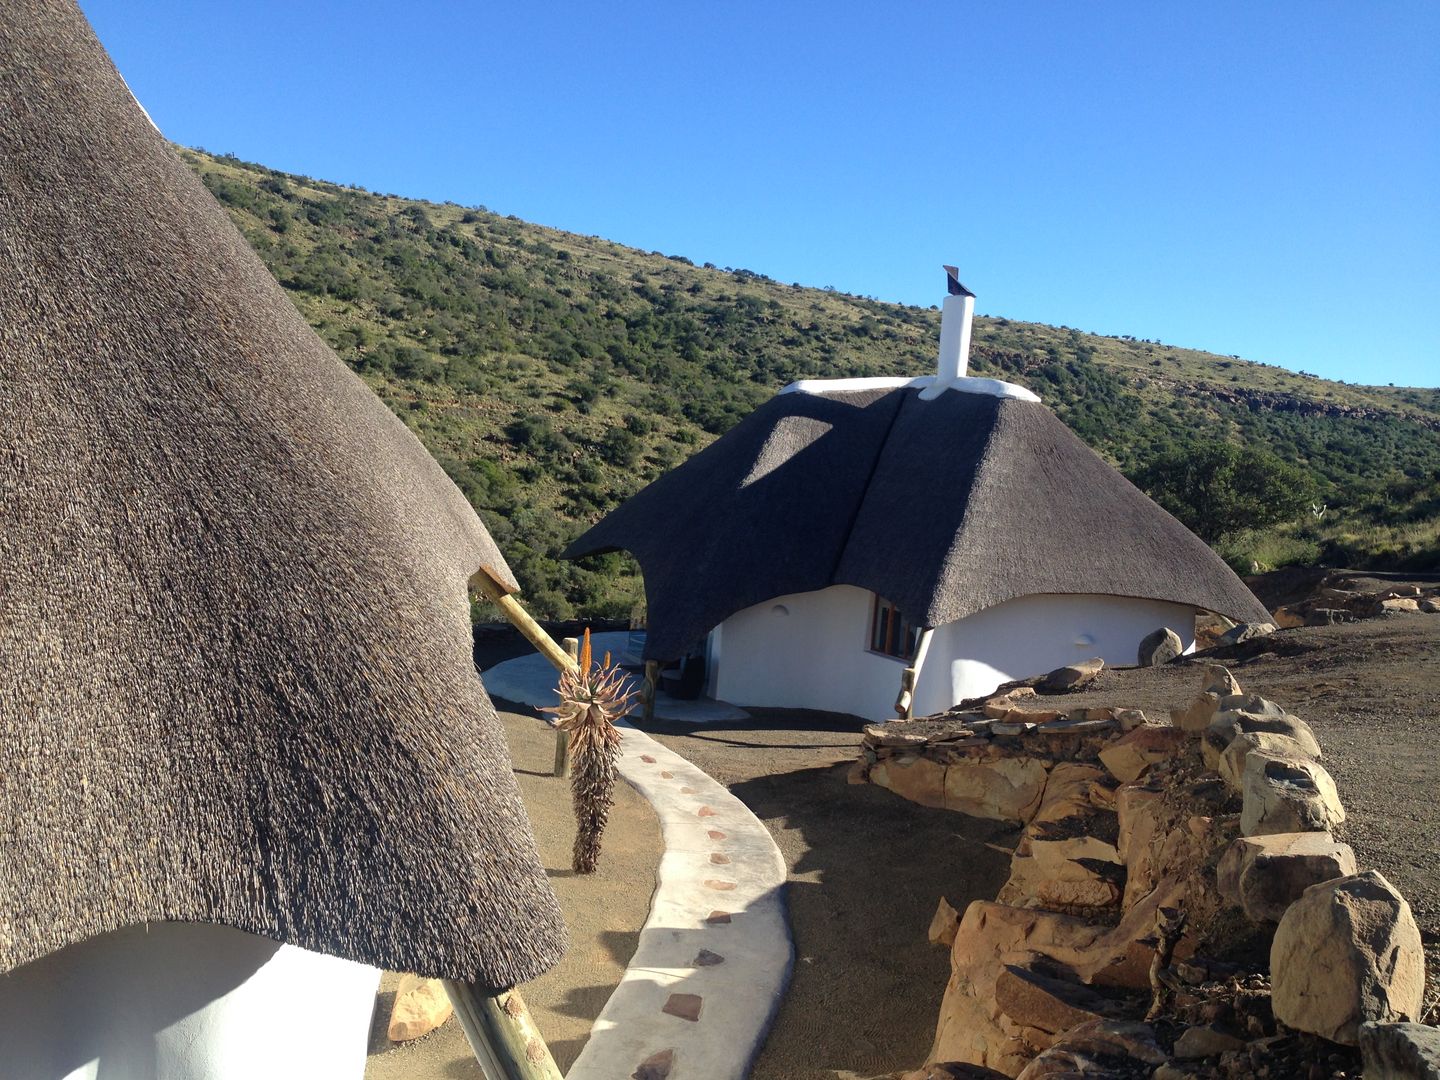 Thatched Cottage at Game Lodge Bosazza Roofing & Timber Homes 房子